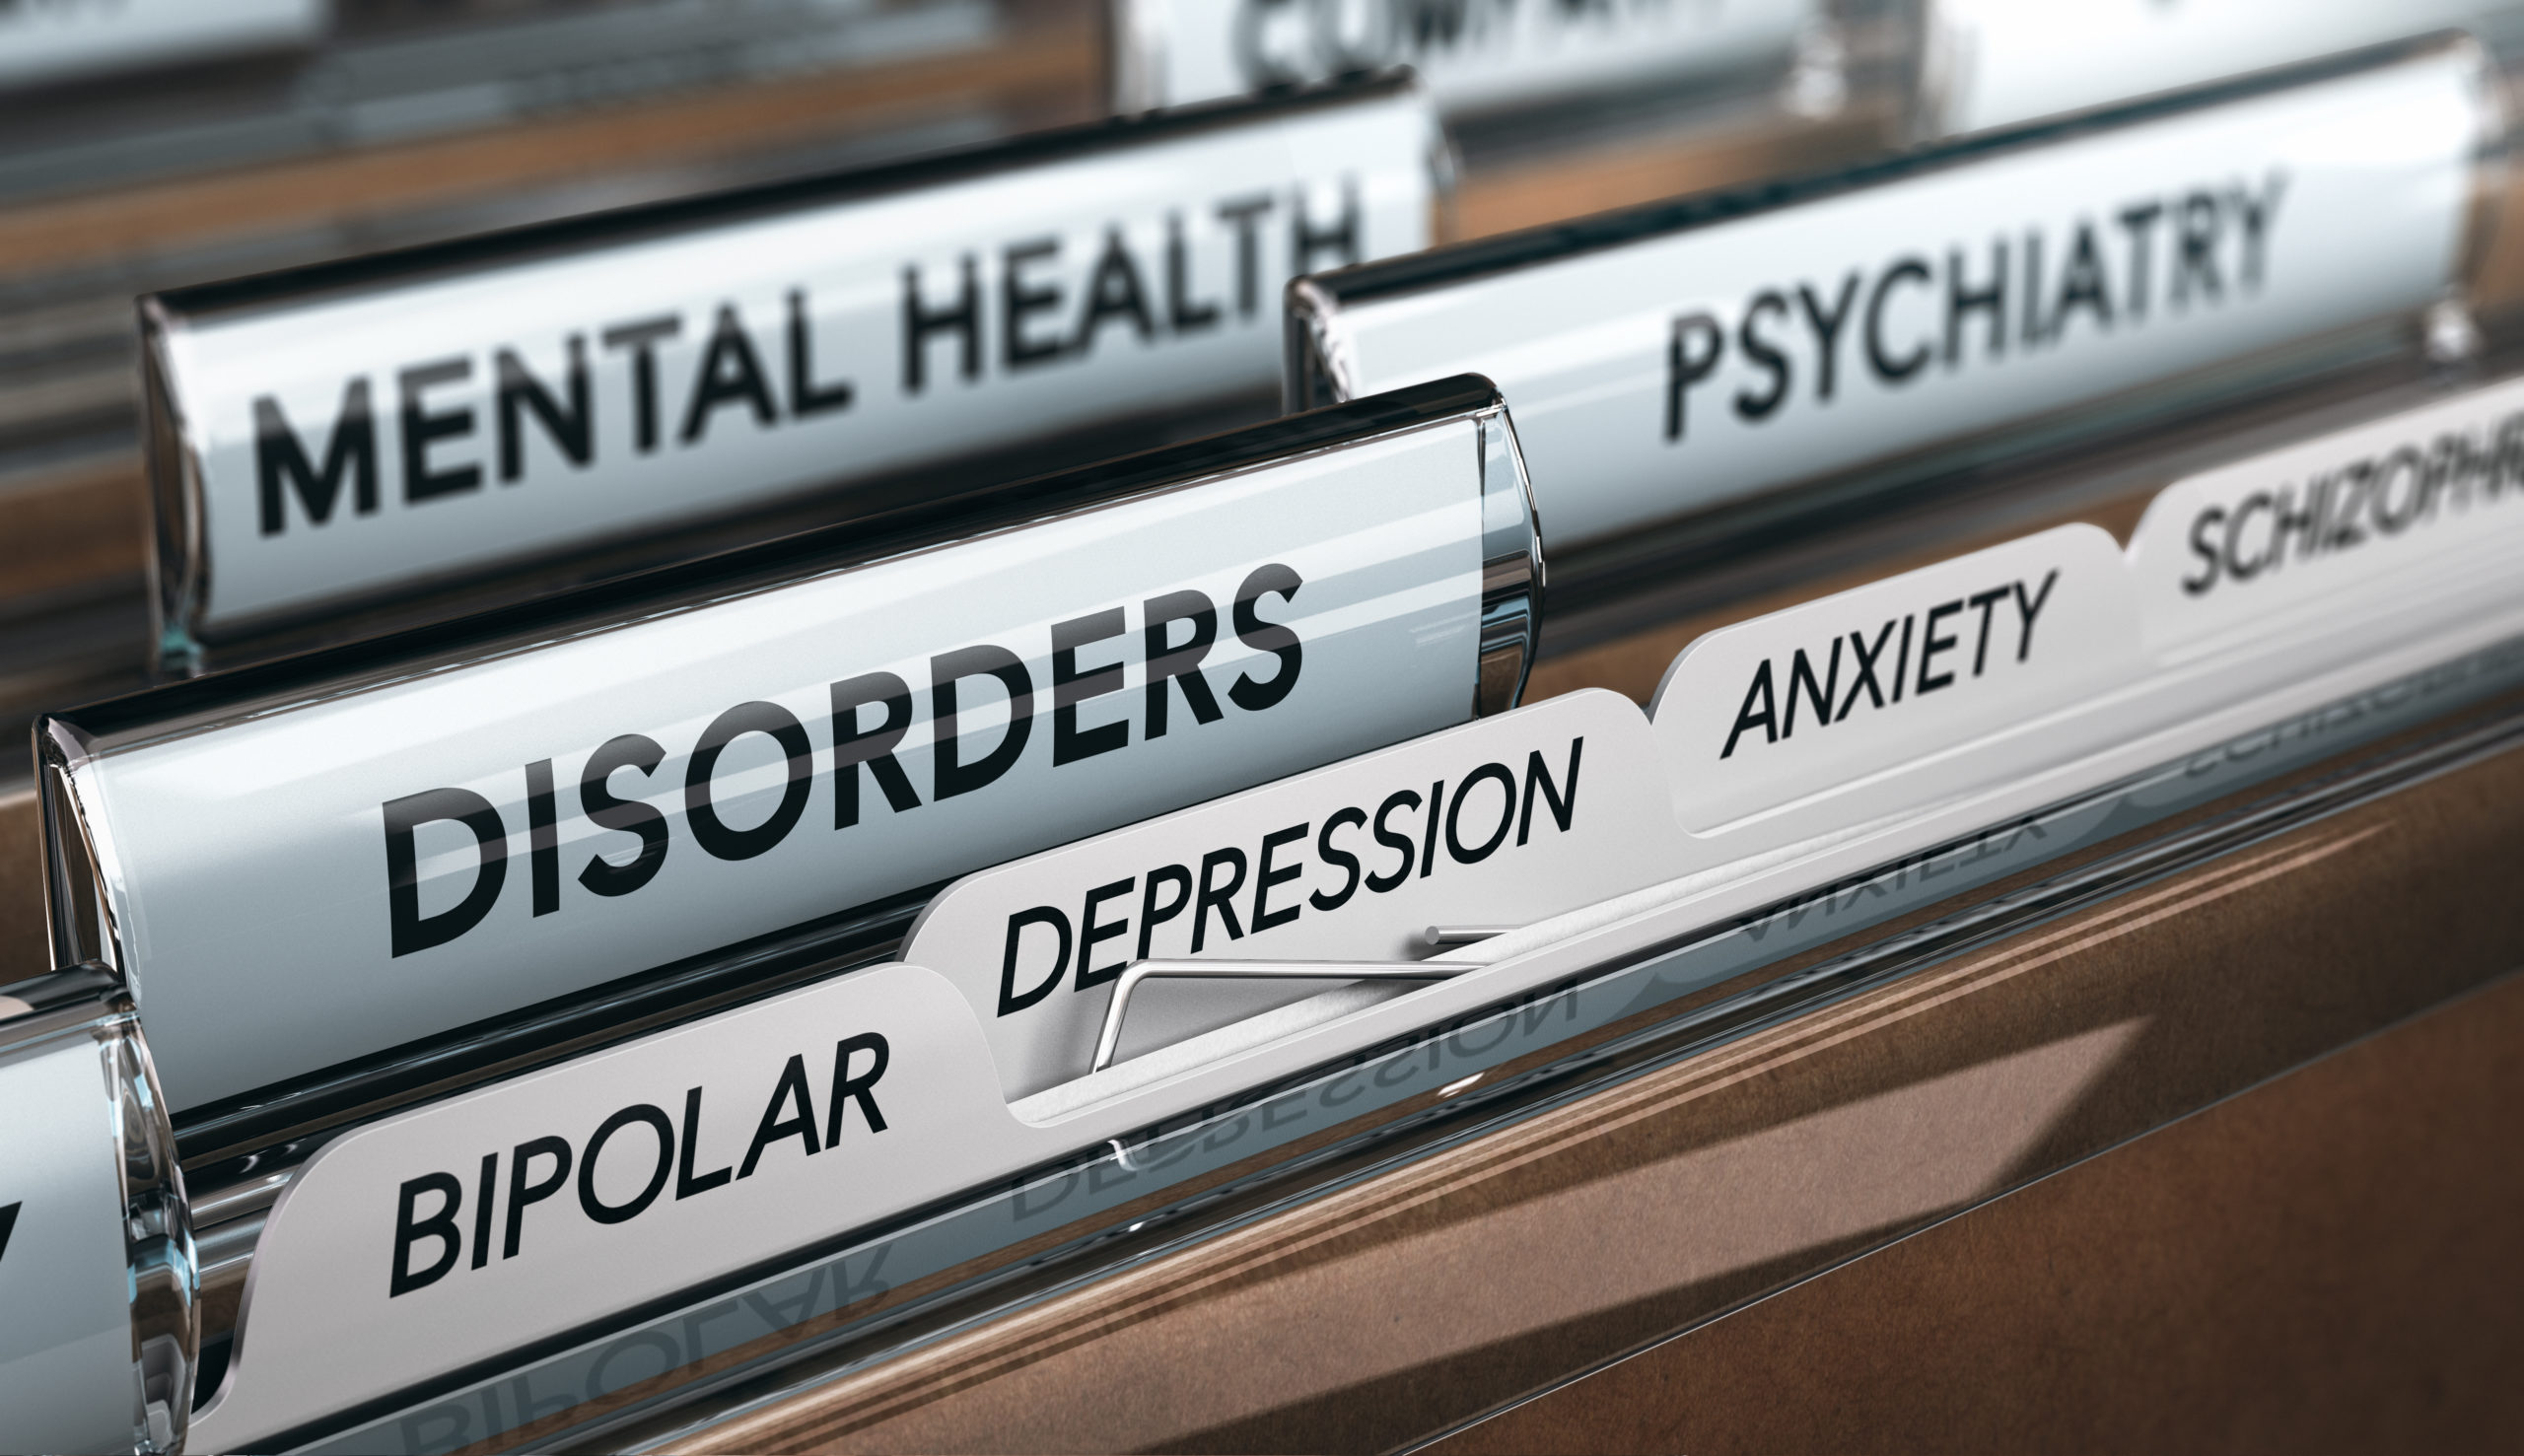 Using NLP for mental health disorders